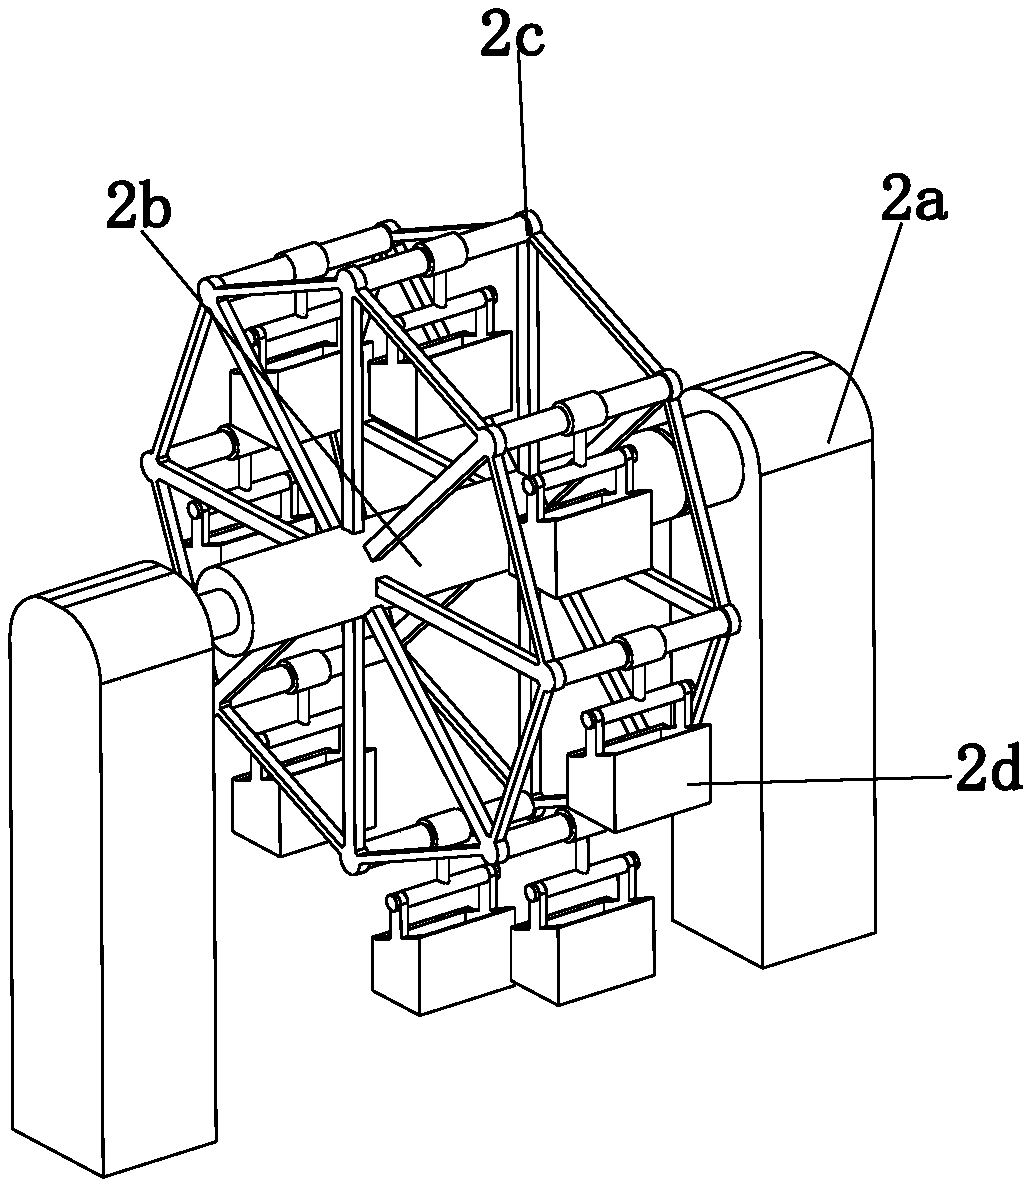 Automatic sand loading device for buildings